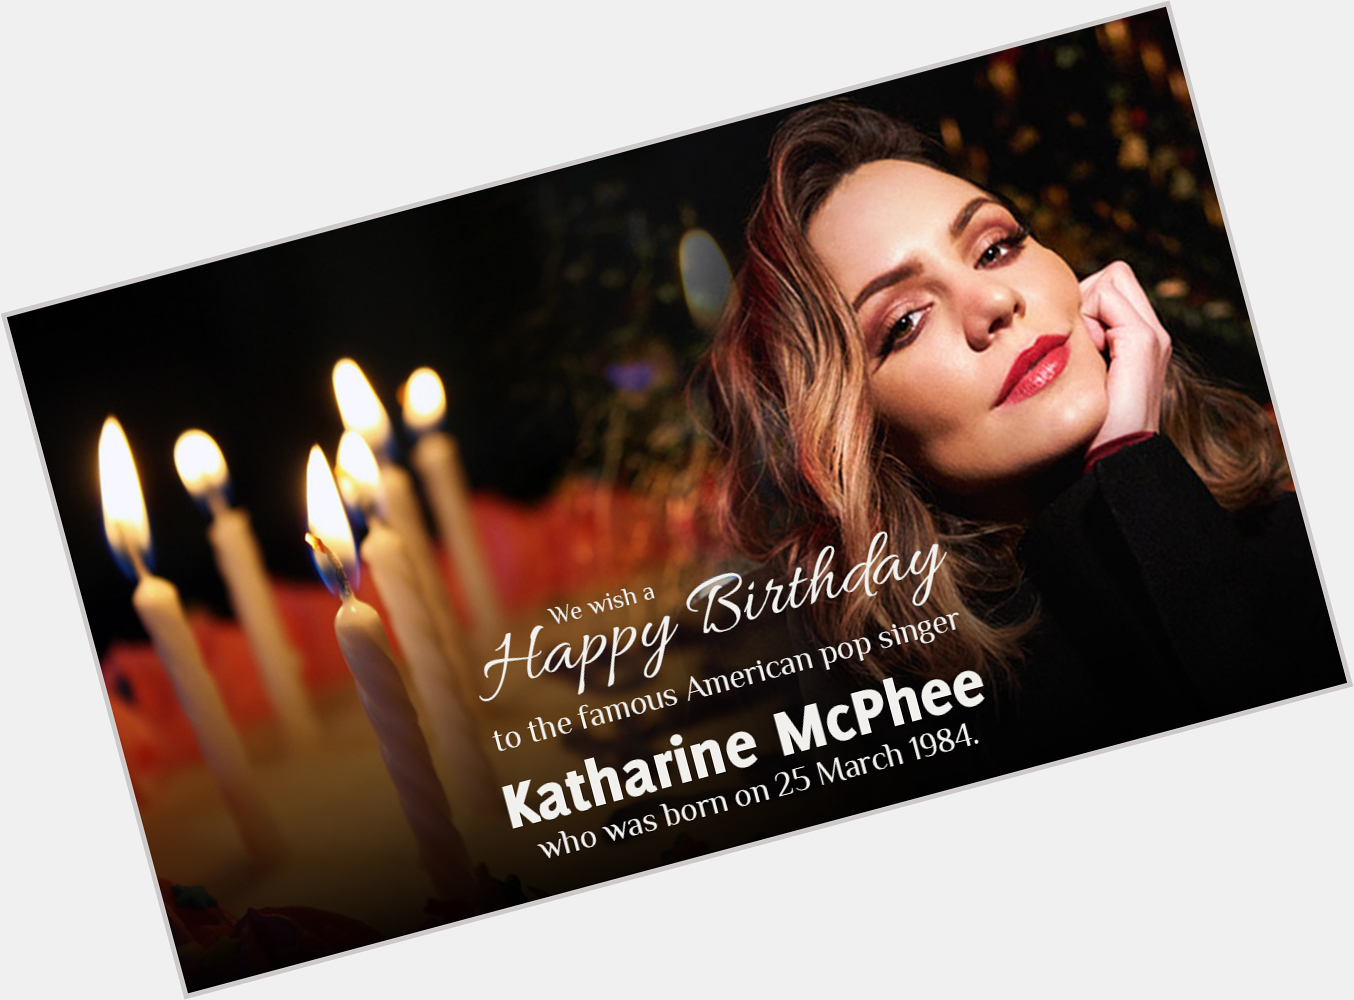 We wish a happy birthday to the famous American pop singer Katharine McPhee, who was born on 25 March 1984. 